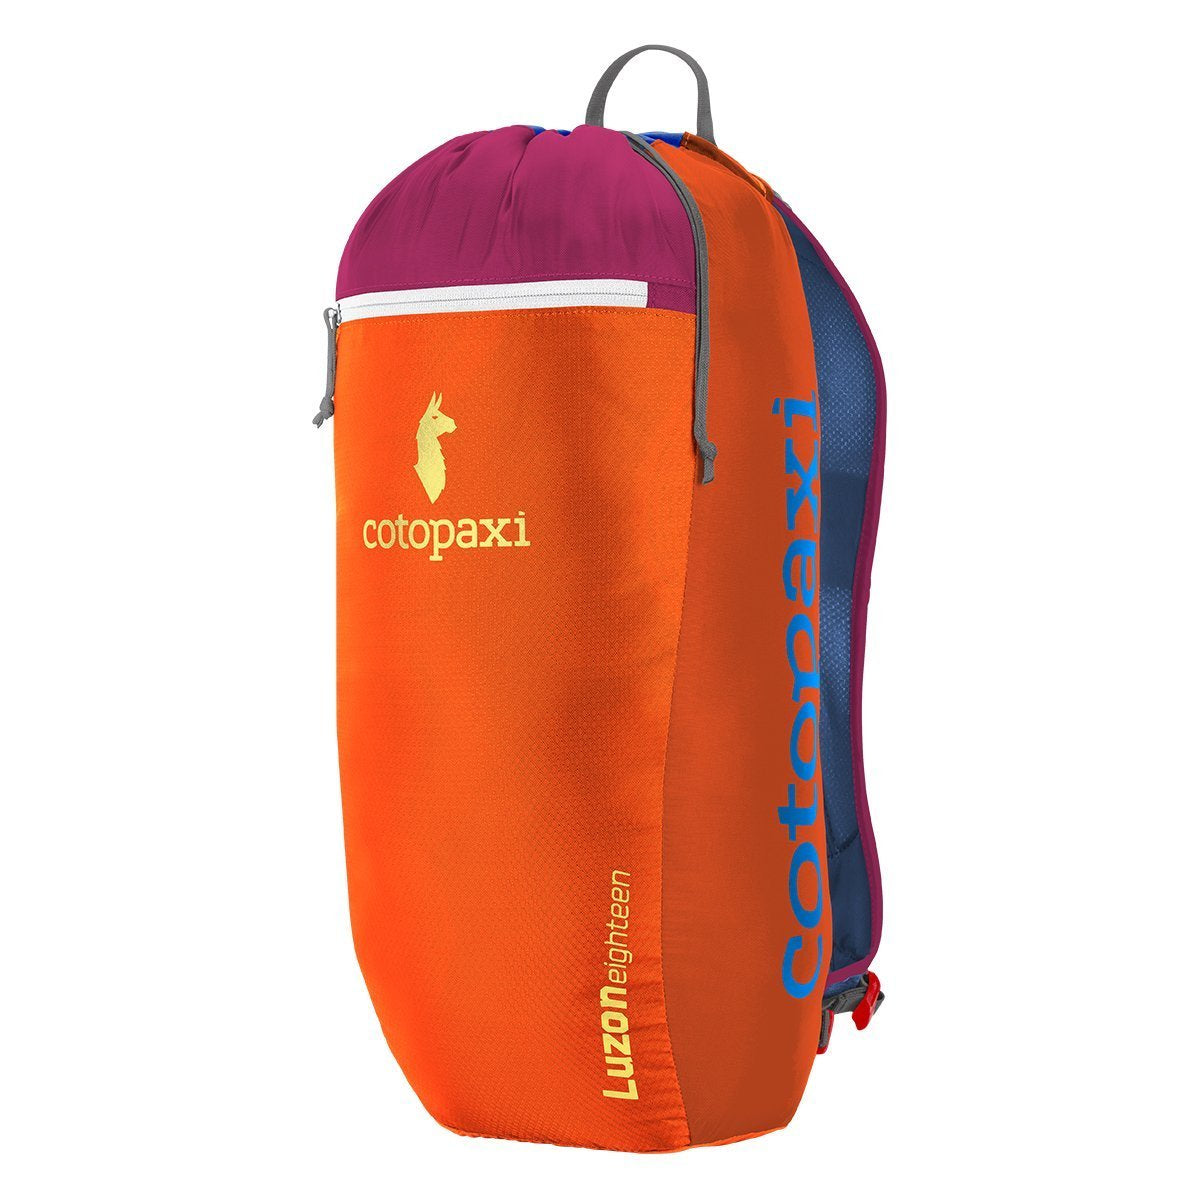 Technical Backpacks – Cotopaxi